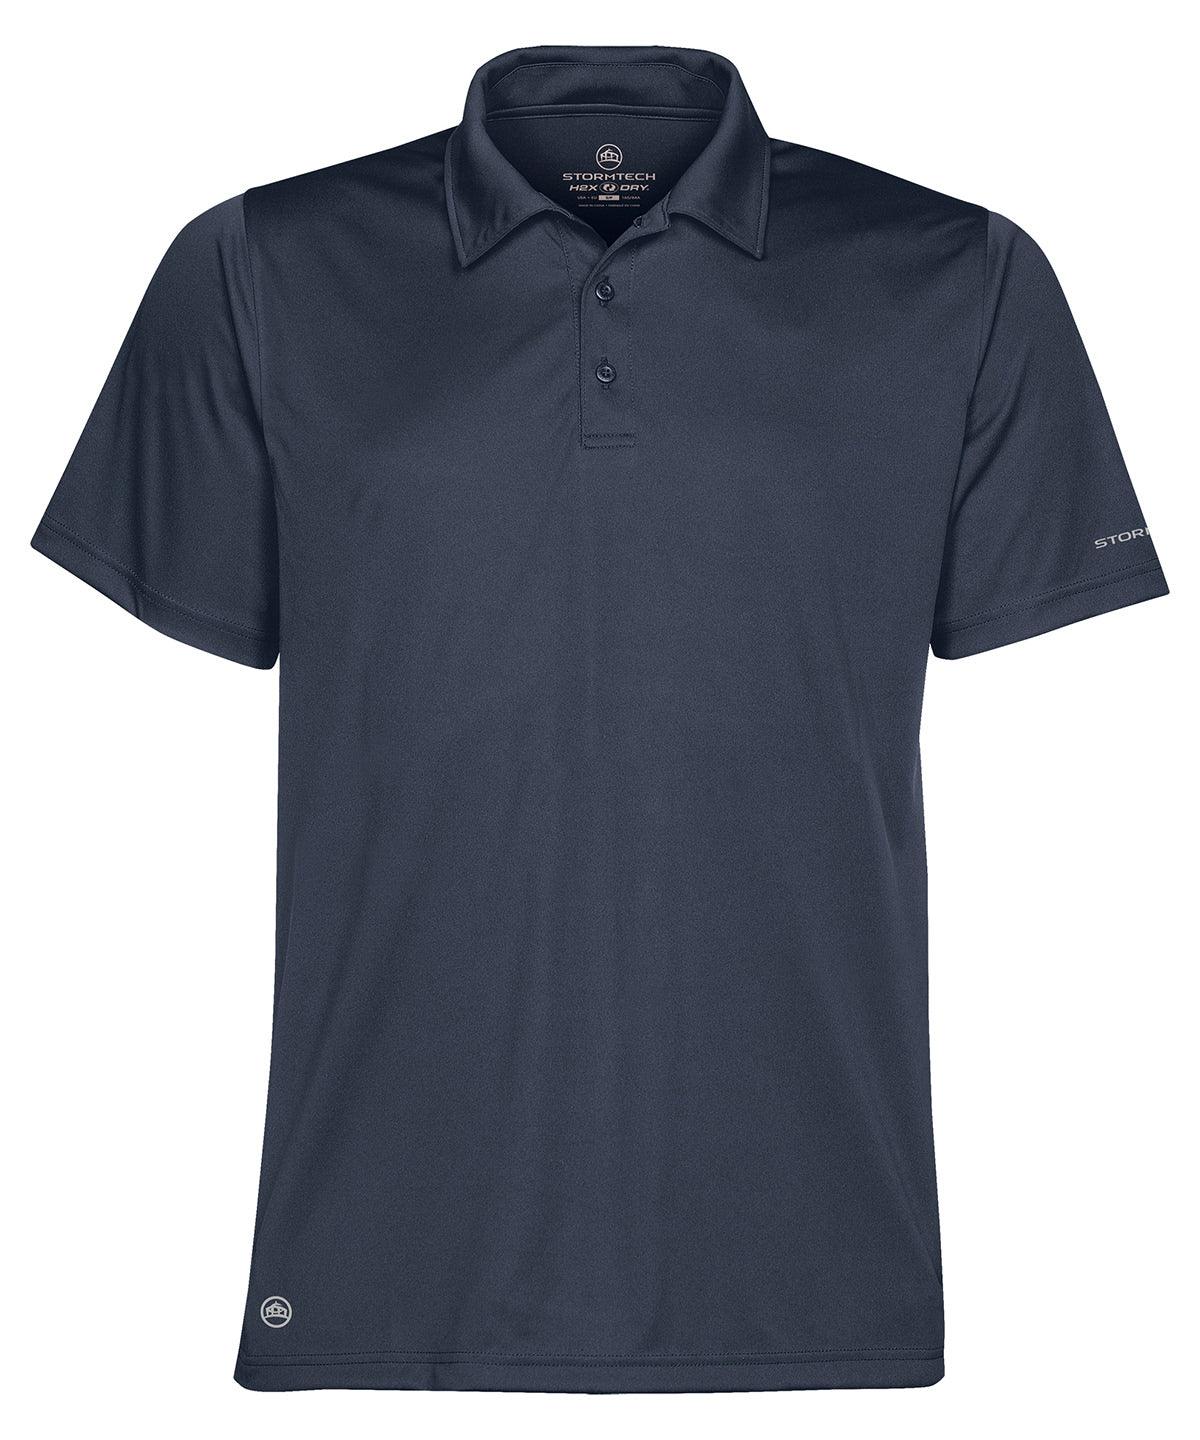 Navy - Sports performance polo Polos Stormtech Activewear & Performance, Must Haves, Polos & Casual Schoolwear Centres